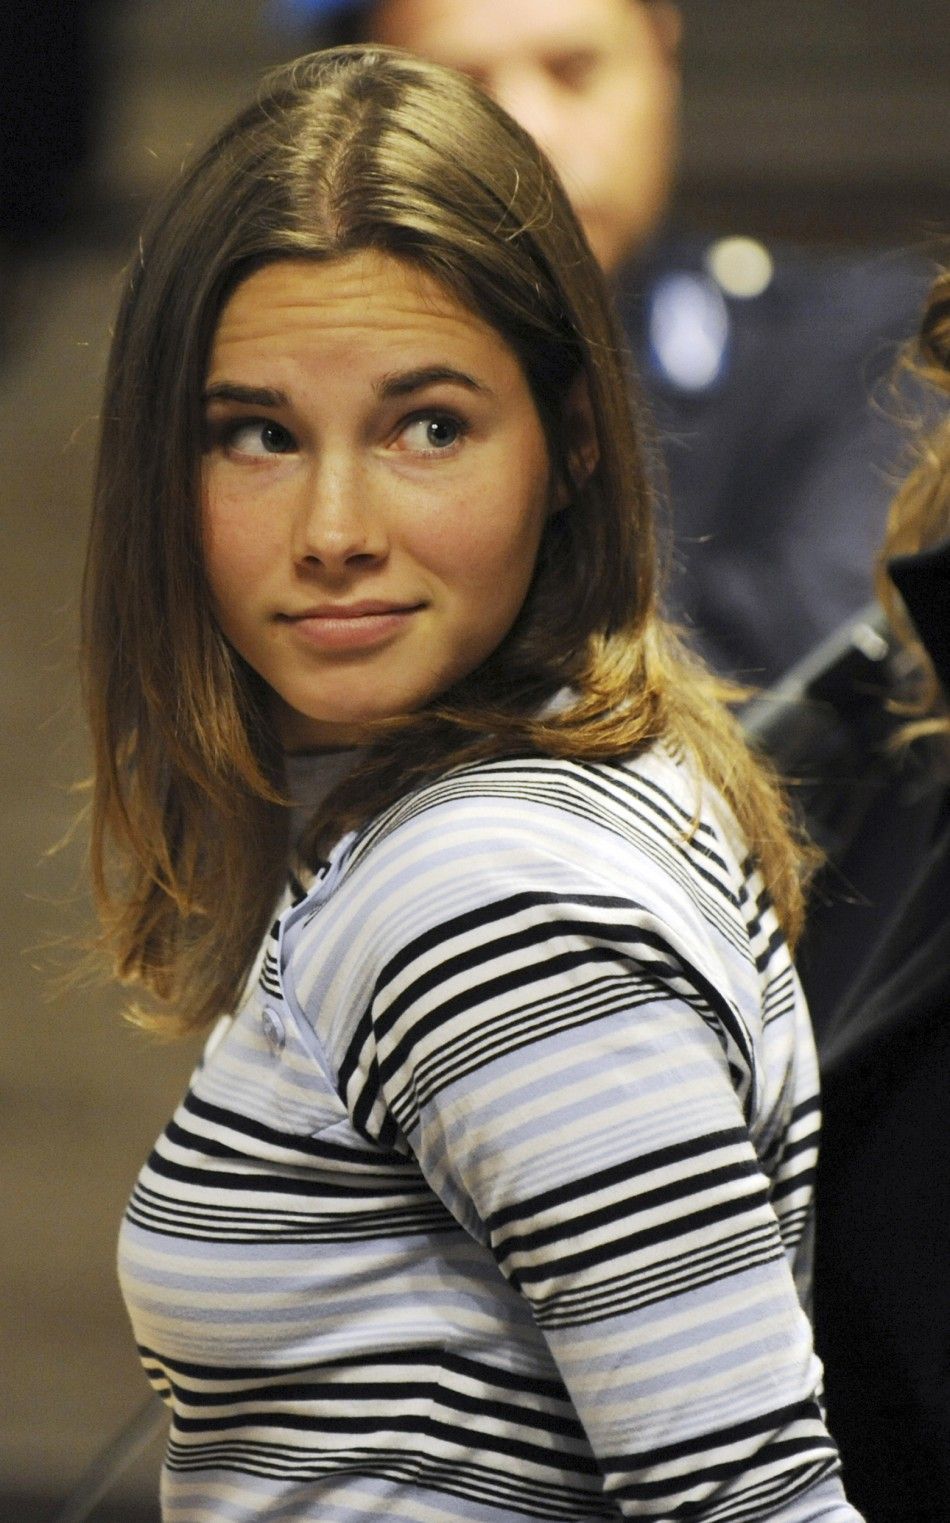 U.S. murder suspect Amanda Knox arrives at her trial for the murder of British student Meredith Kercher in Perugia